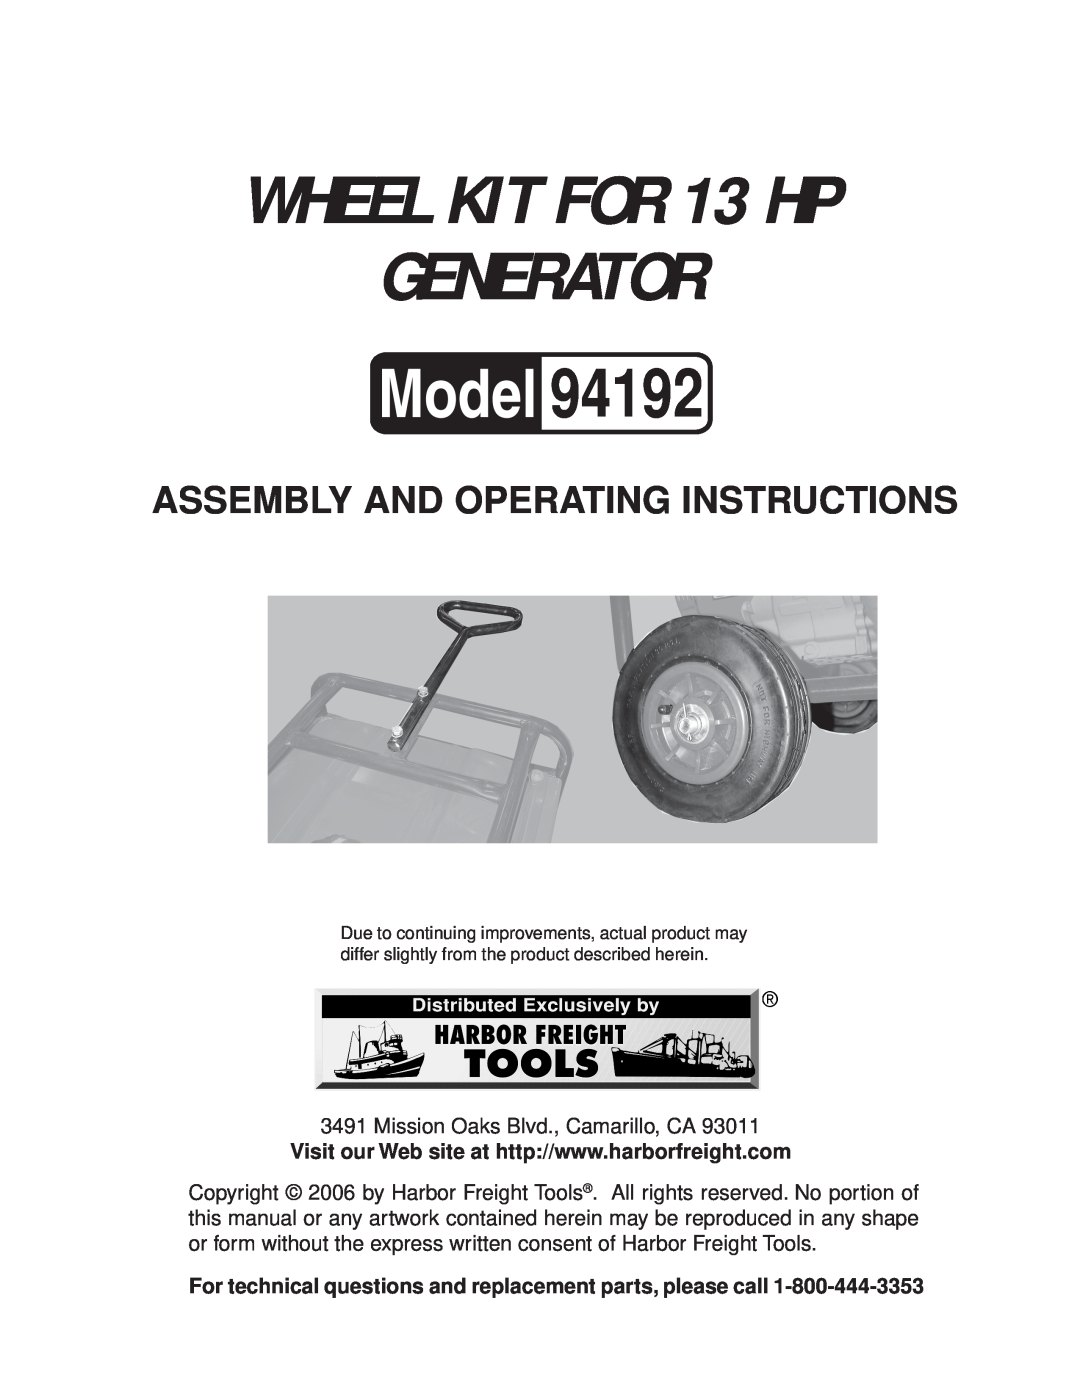 Harbor Freight Tools 94192 operating instructions For technical questions and replacement parts, please call 